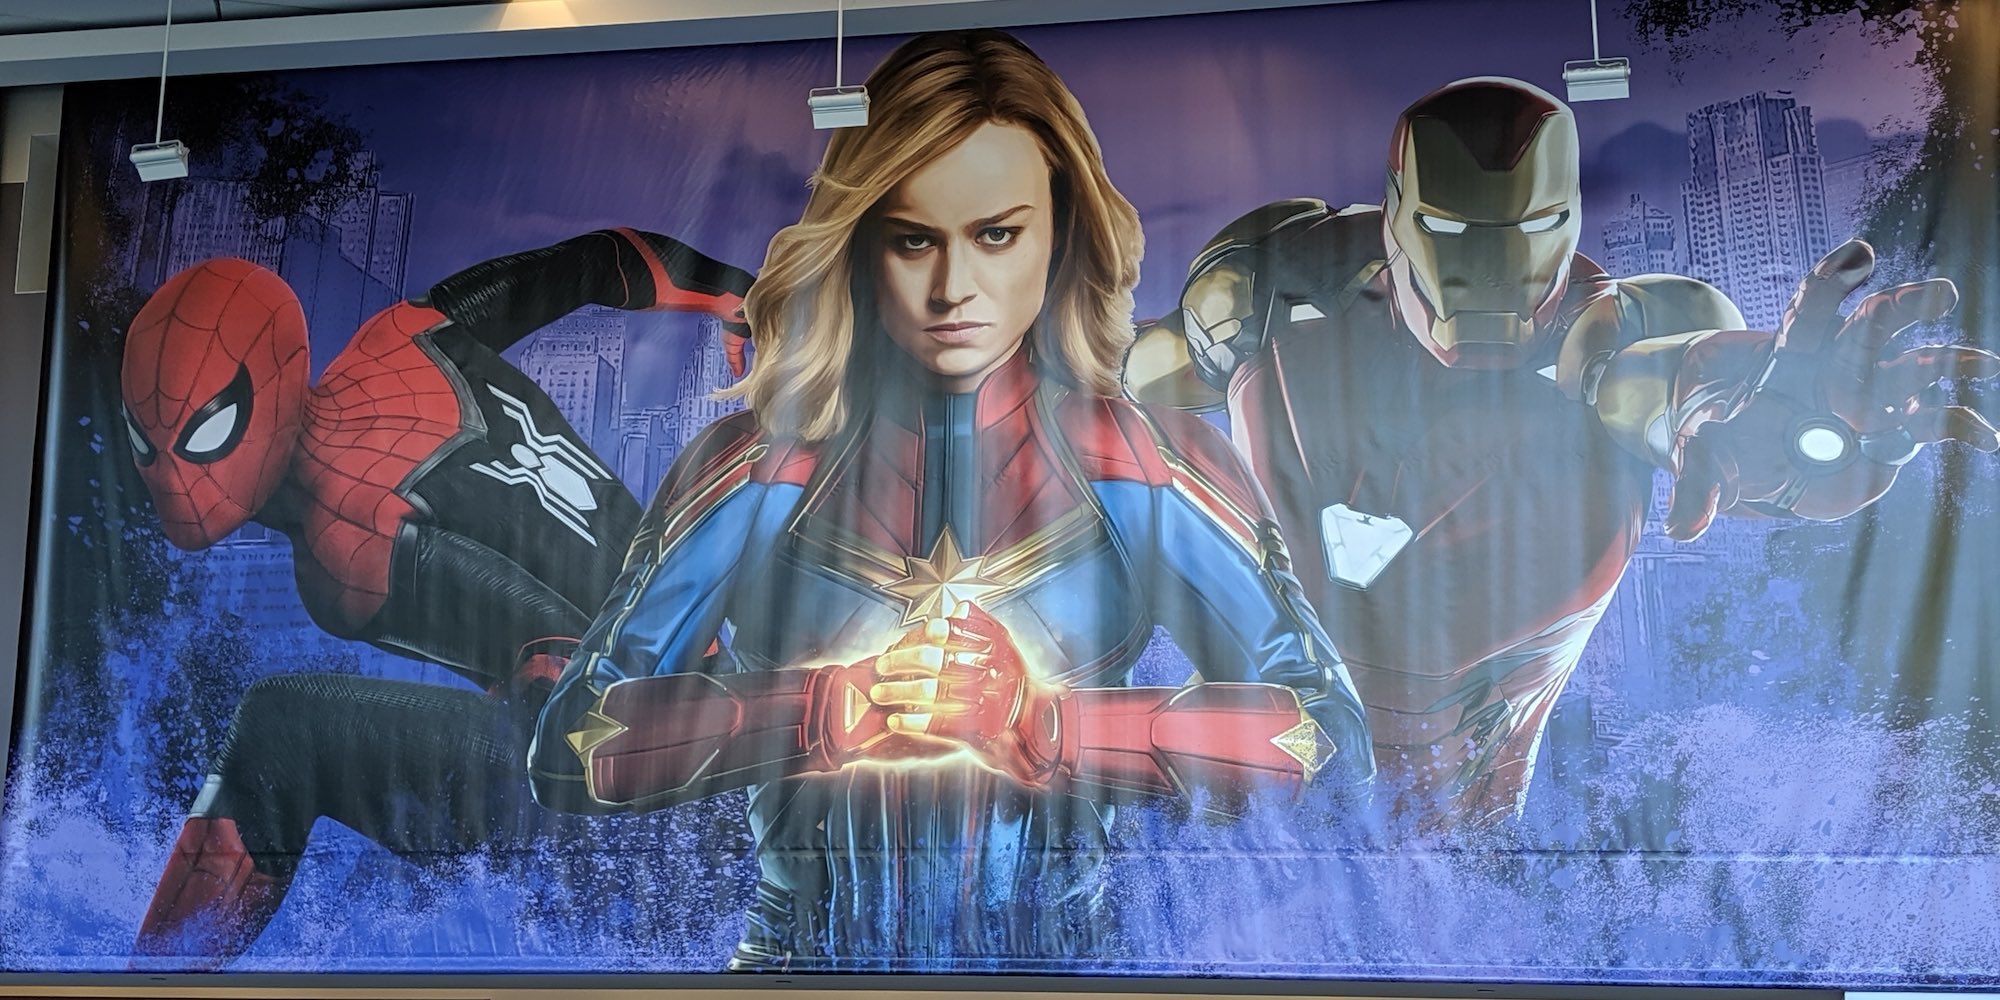 Marvel Studios' banner at D23 Expo 2019